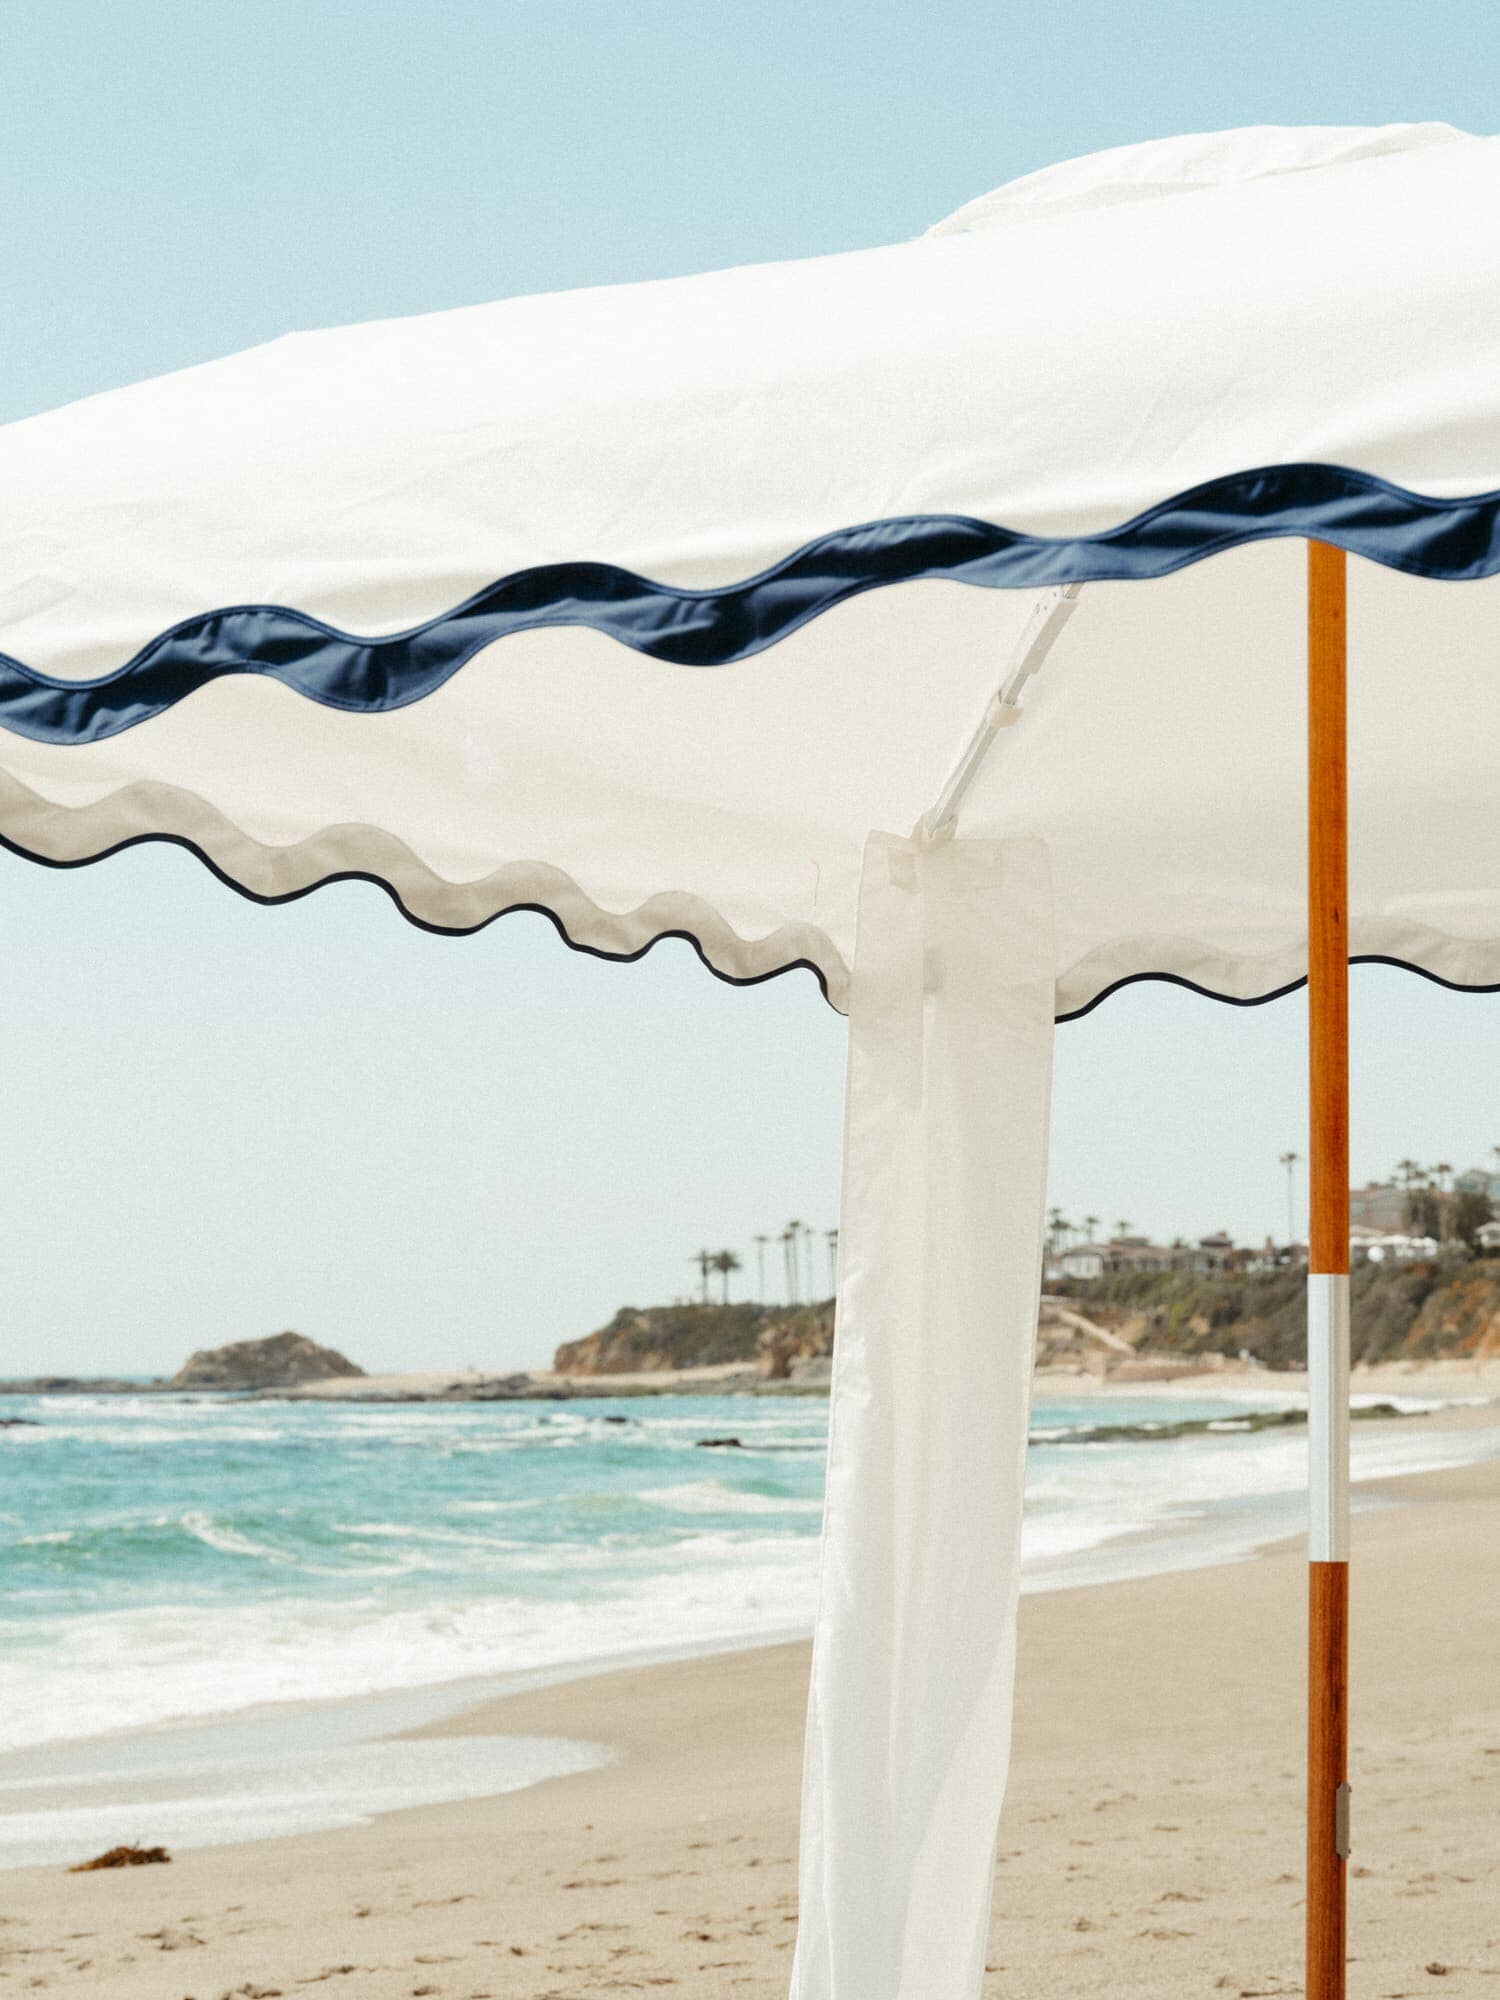 Riviera white cabana with matching accessories on the beach